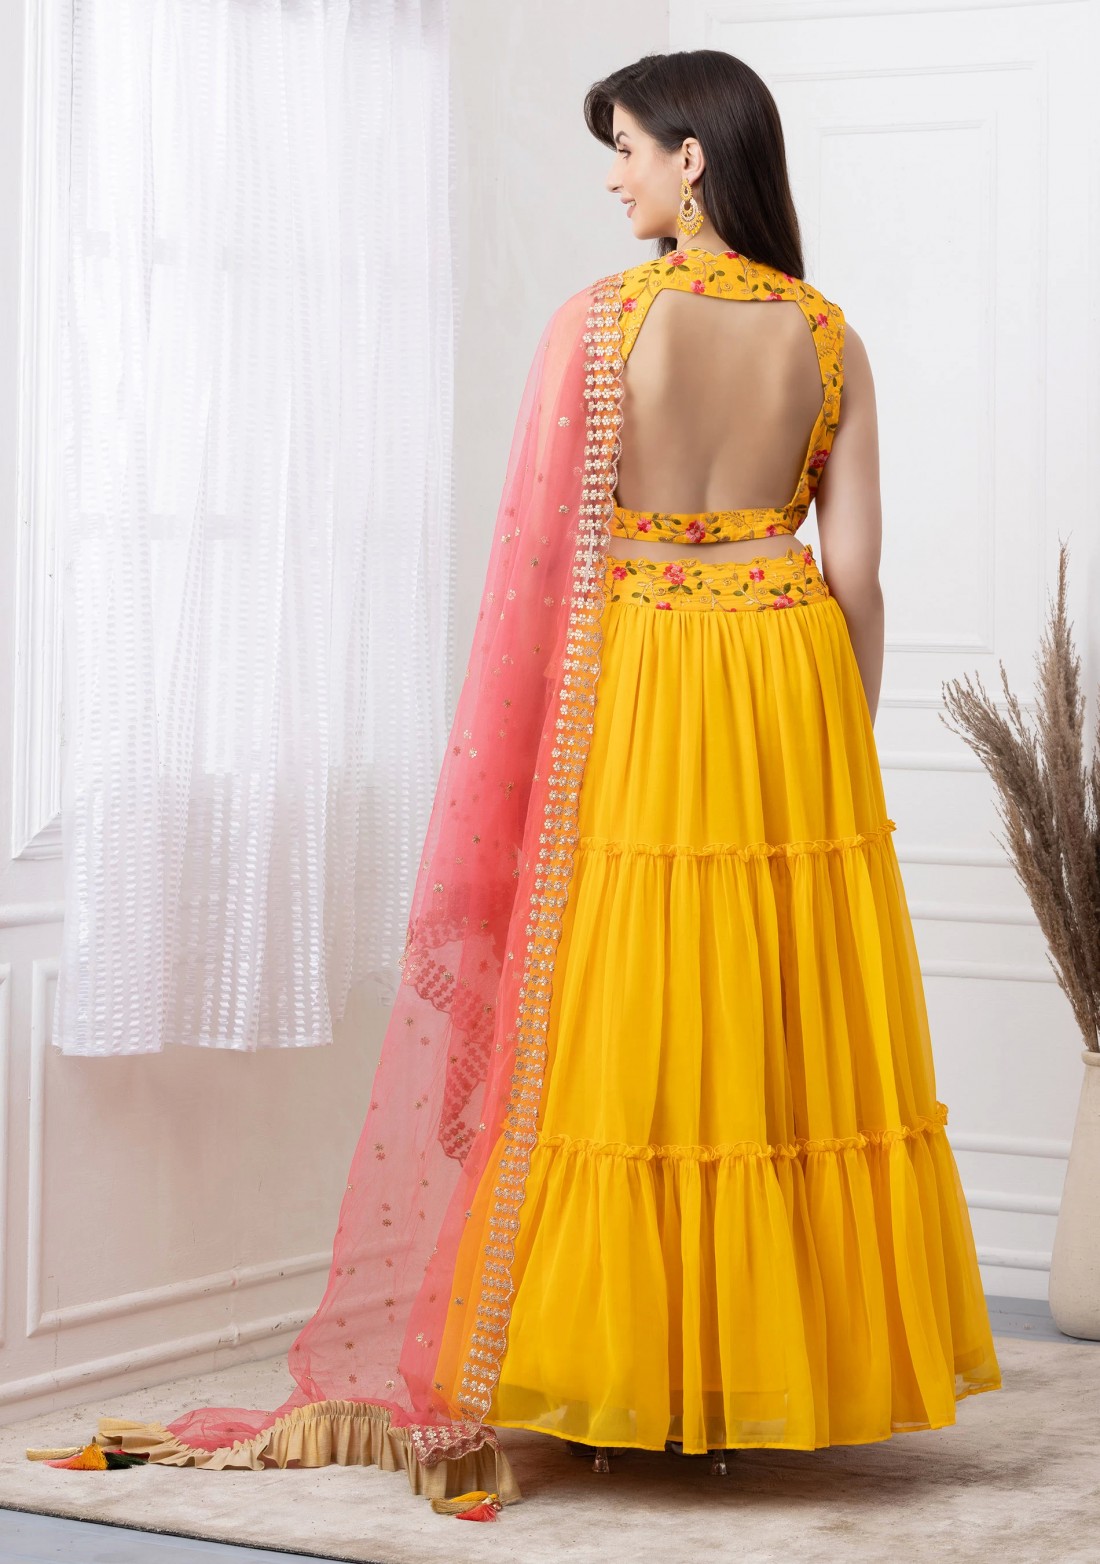 Yellow Heavily Flared 3 Tier Embroidered Georgette Lehenga